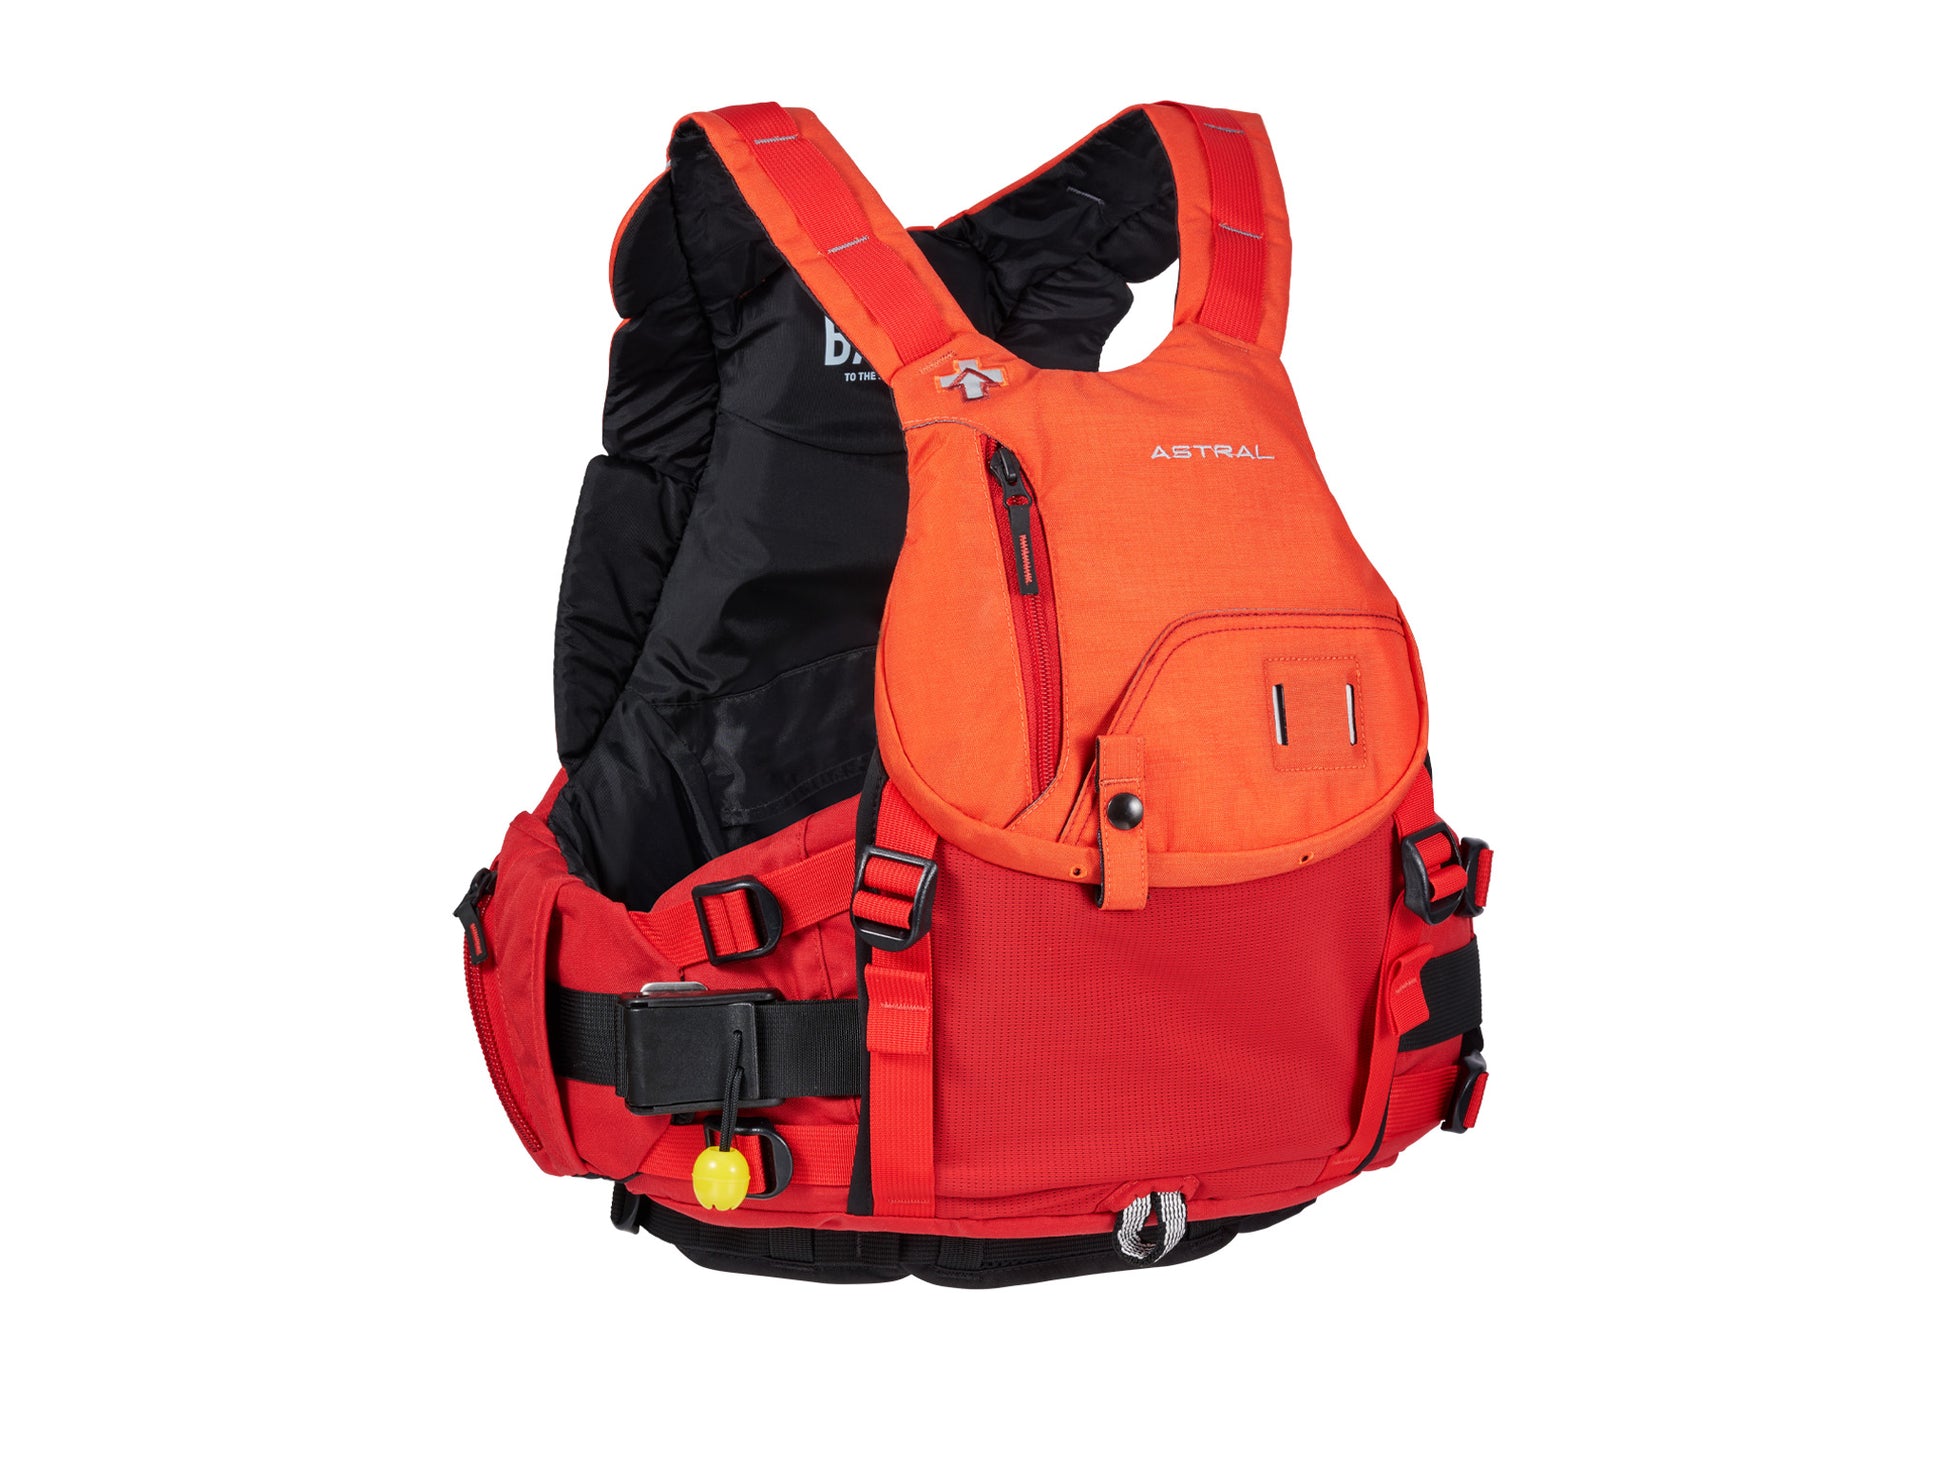 A red and black Astral Indus High Float Rescue PFD.